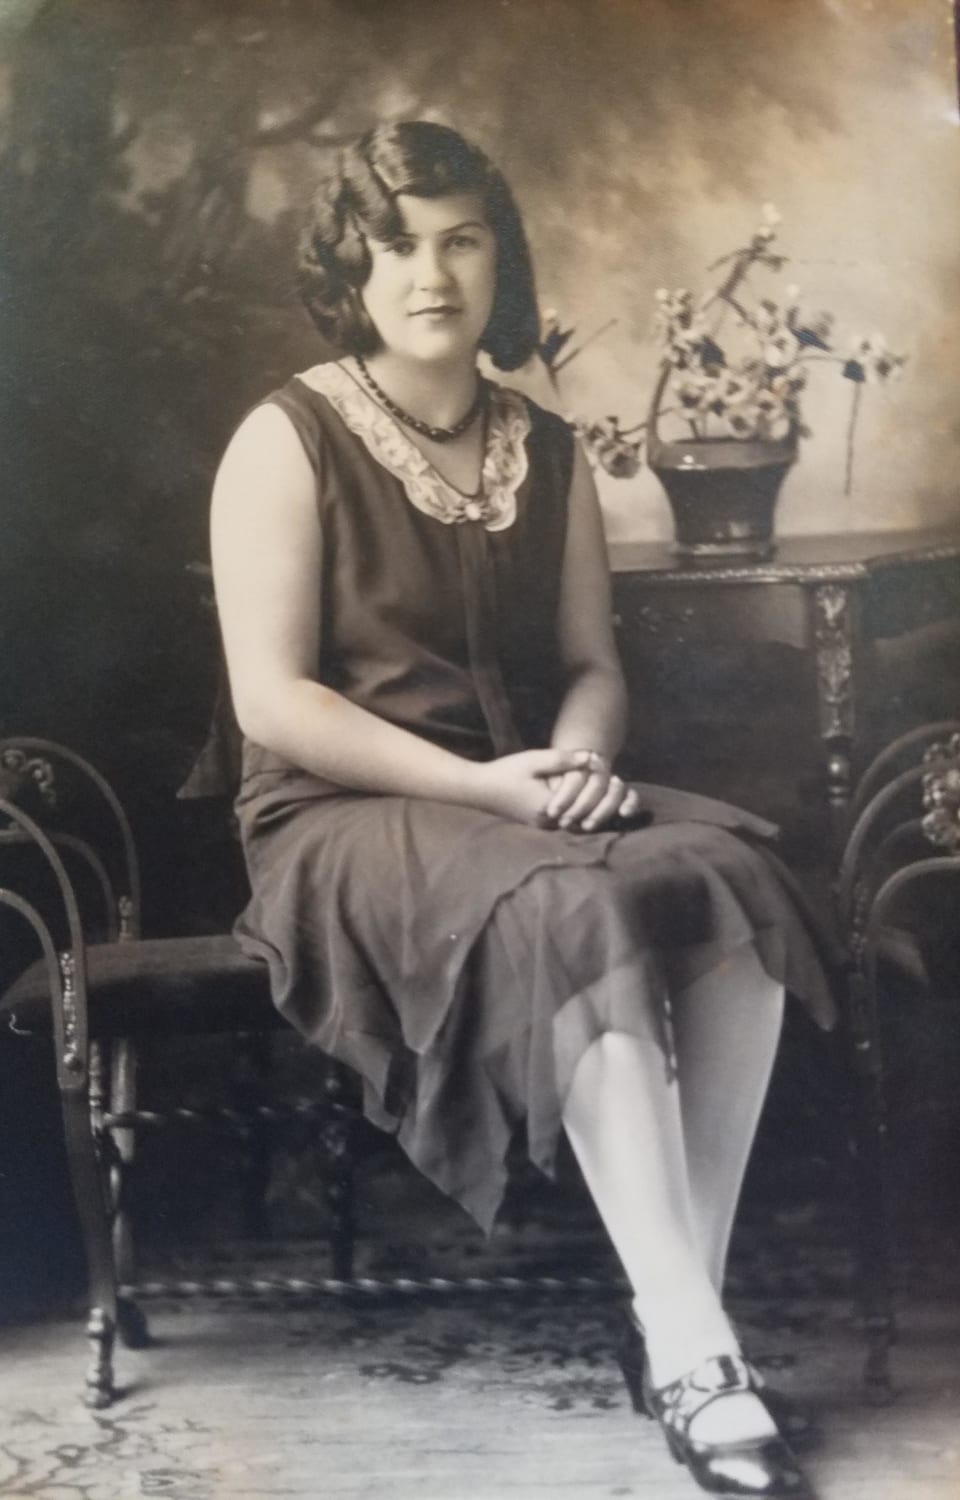 My great grandma Juanita. She was born in 1915 and lived in rural Kansas for over 100 years.